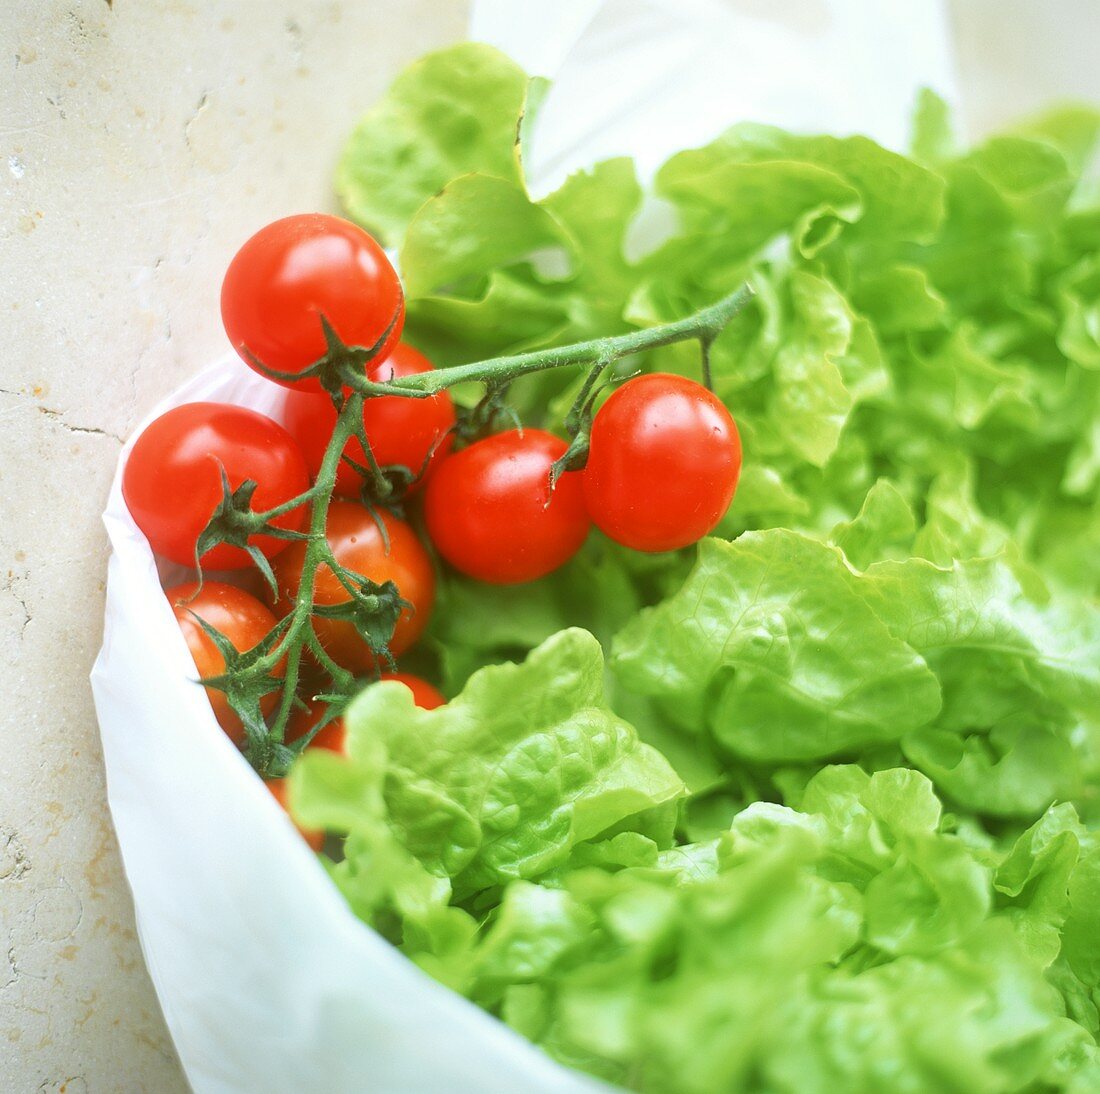 Lettuce and cherry tomatoes